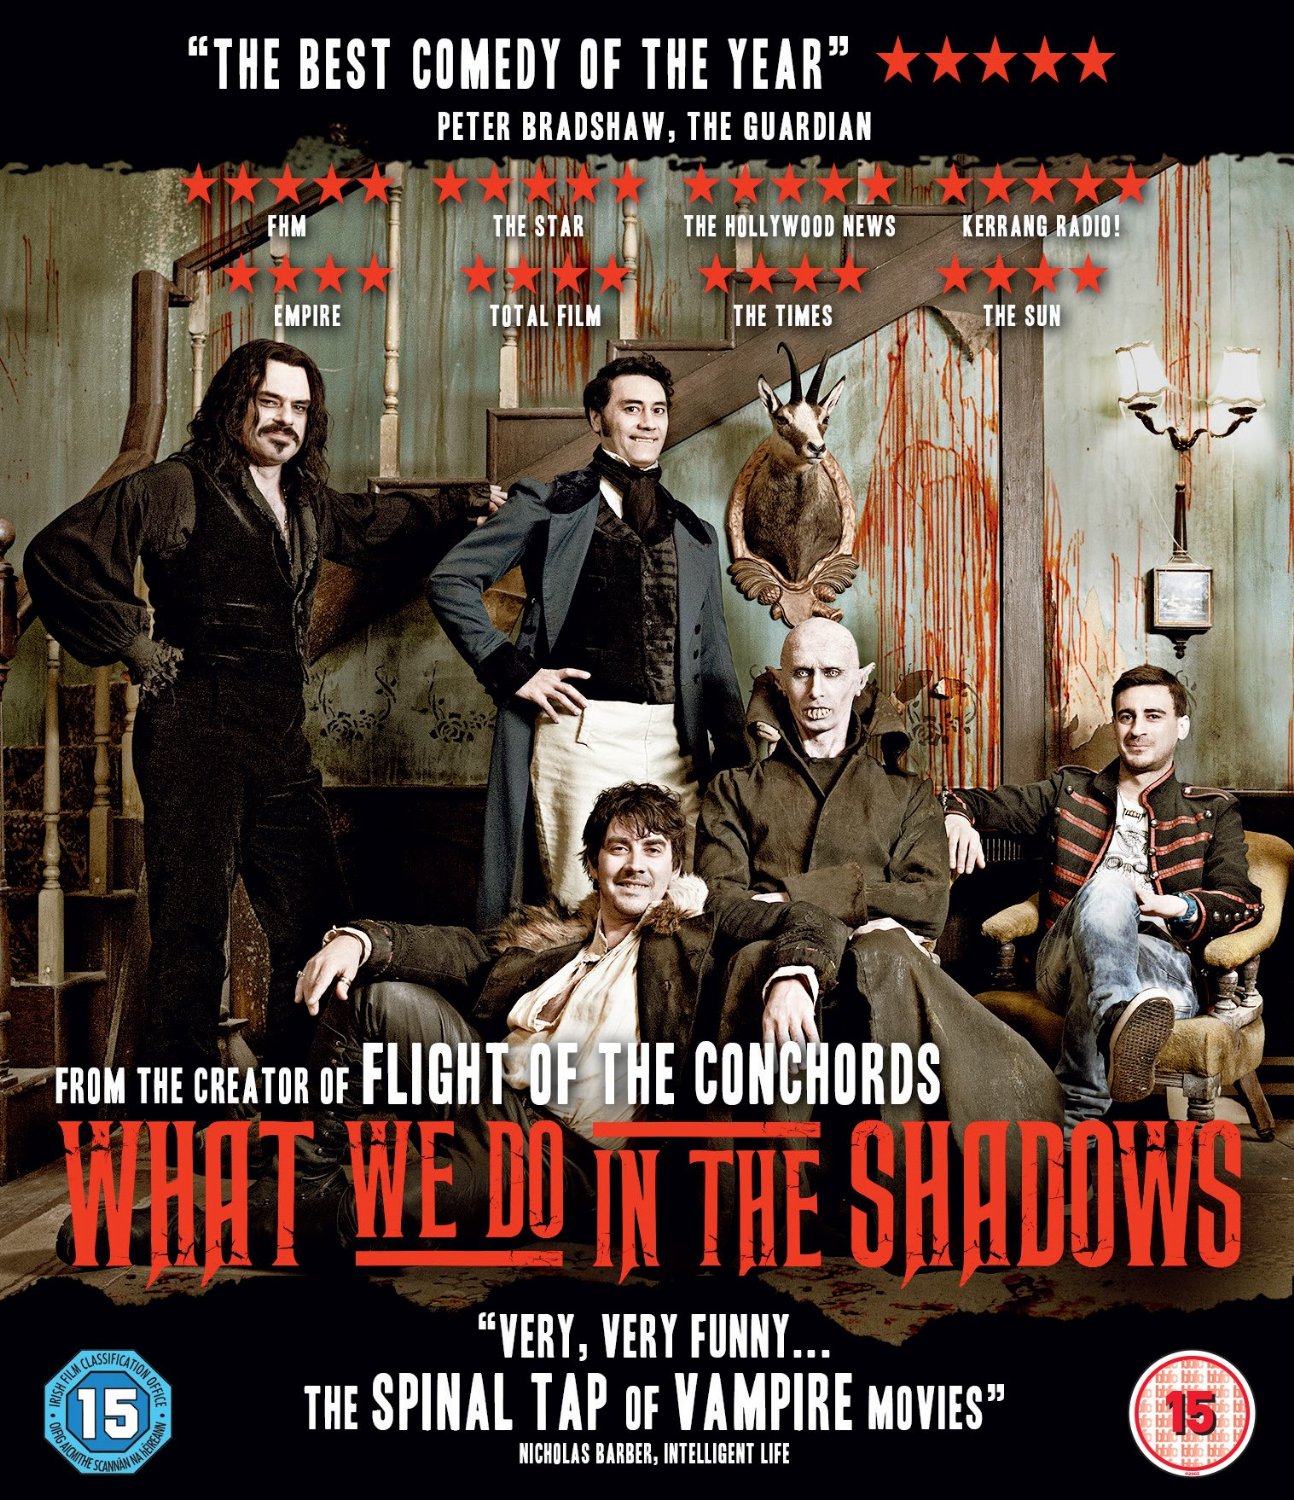 what we do in the shadows (2014)dvdplanetstorepk